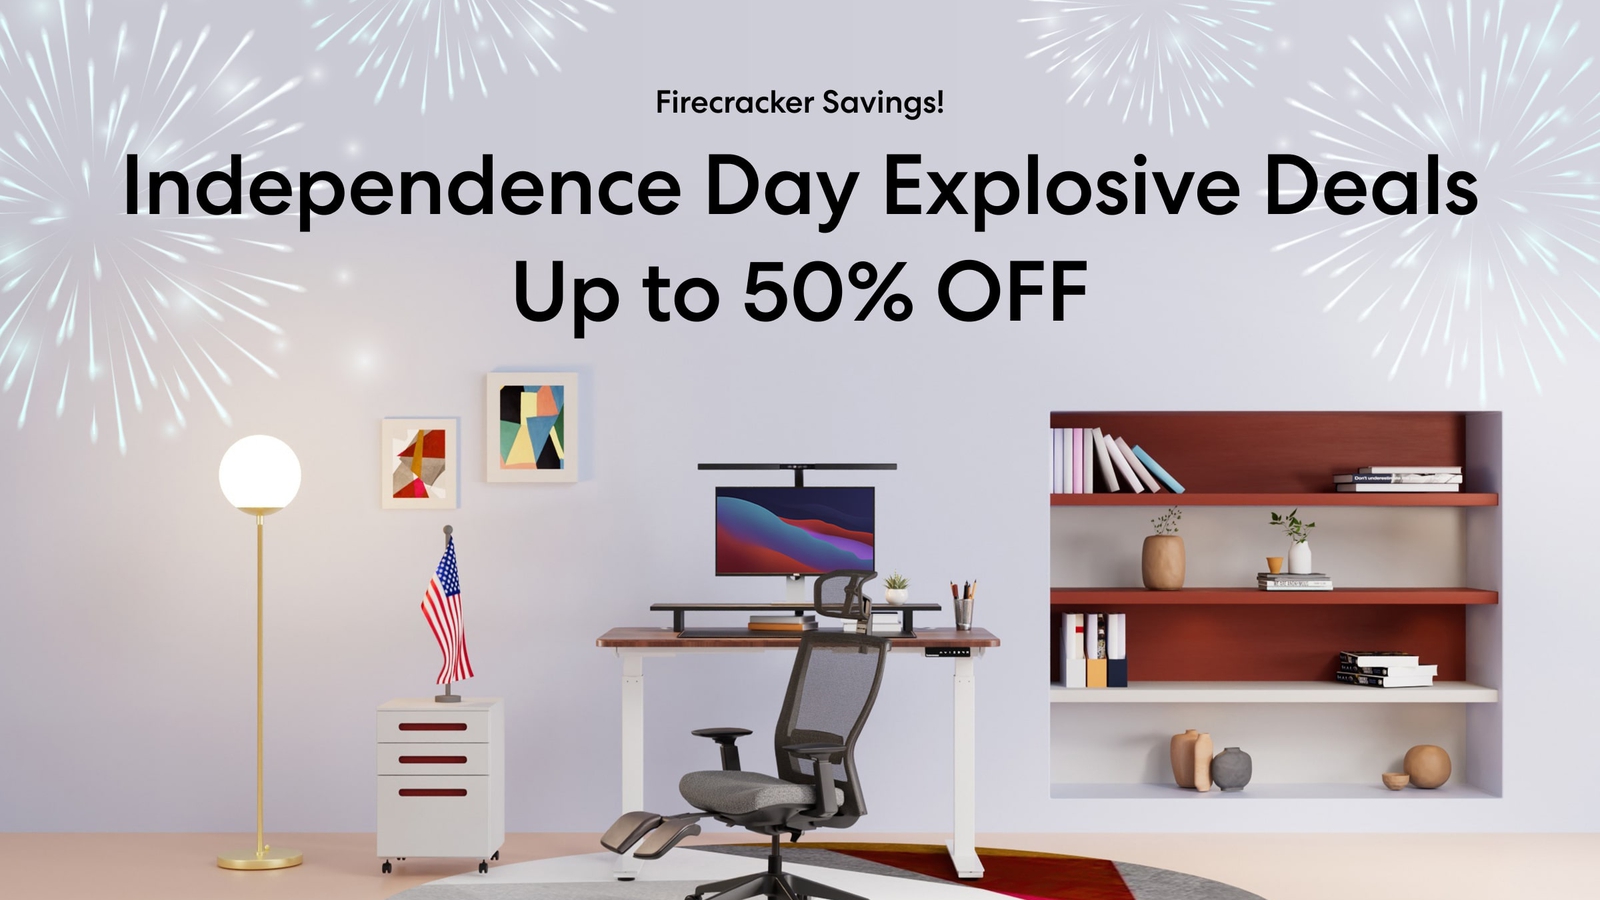 July 4th Firecracker Sale: Unbeatable Deals and Savings!